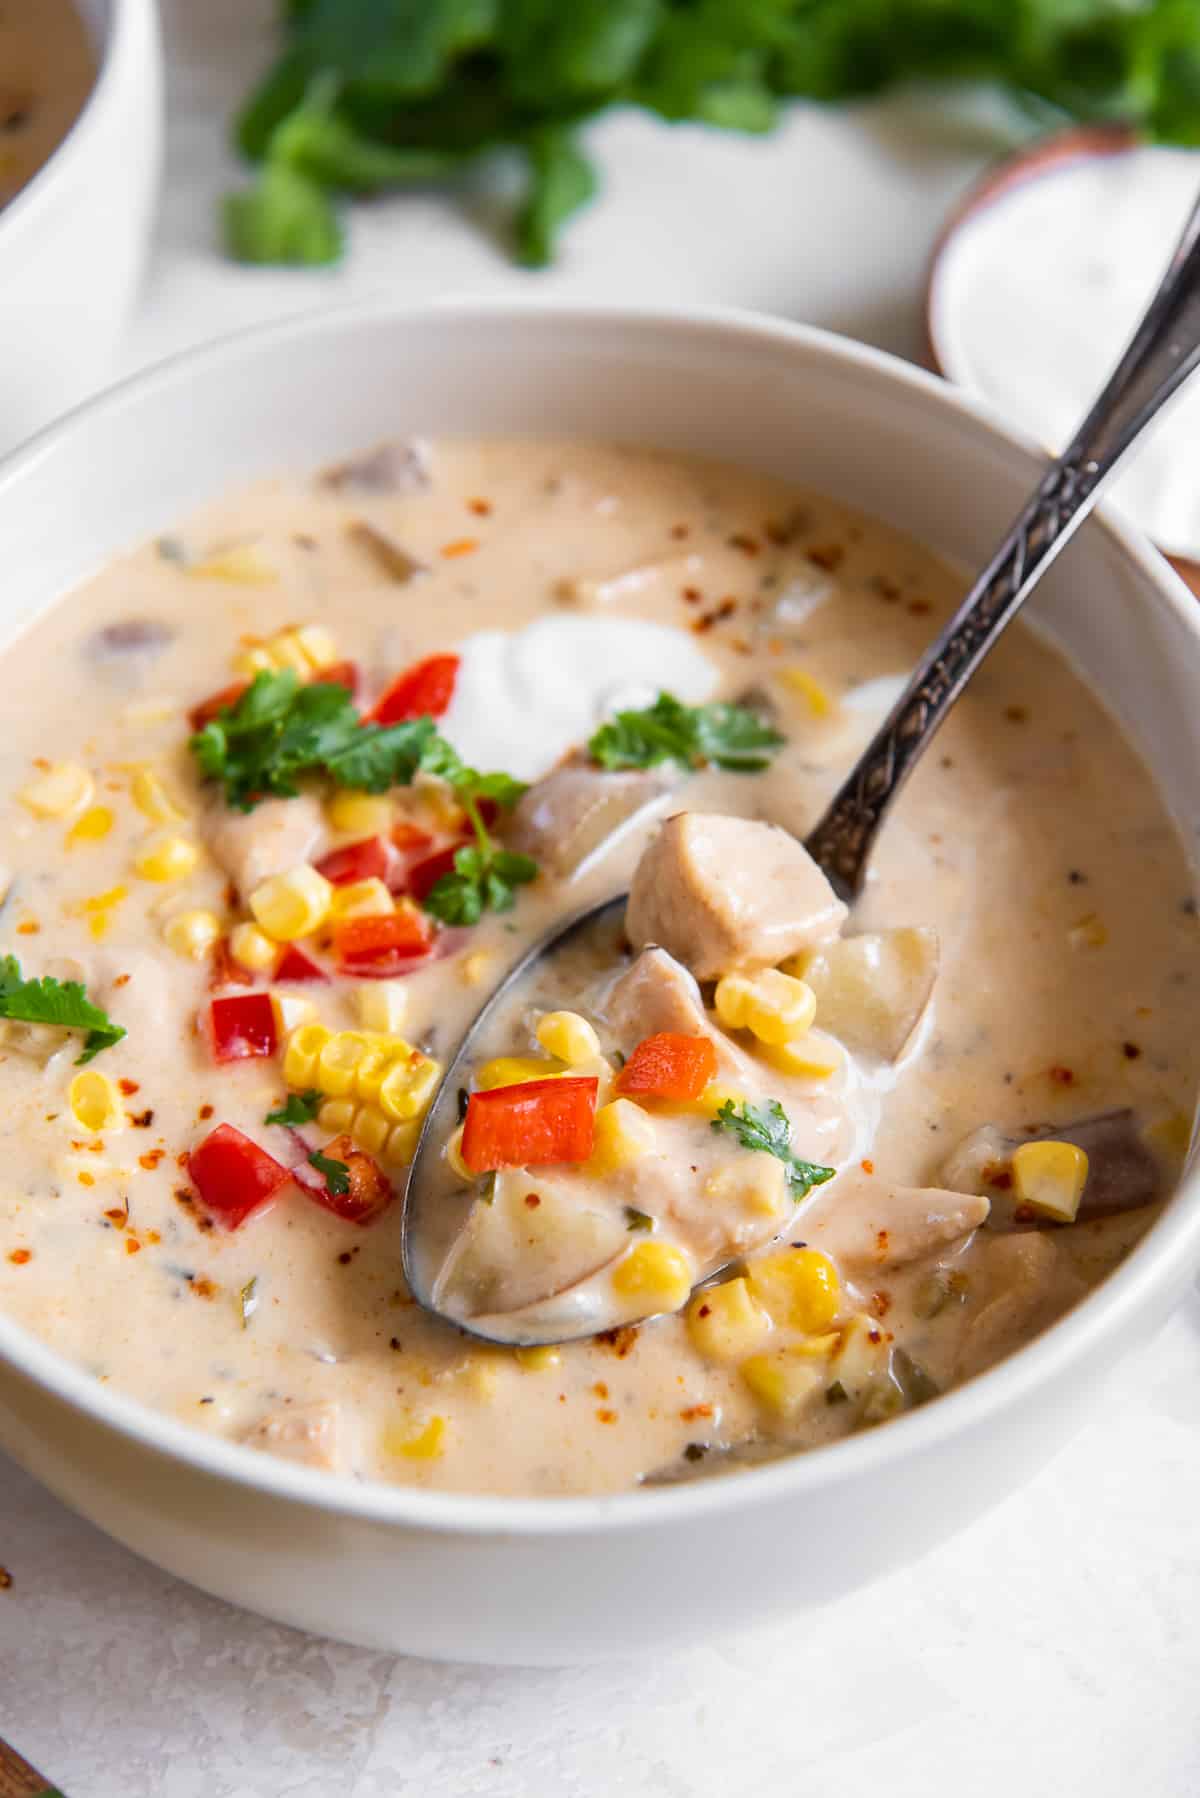 A spoon scooping up chicken corn chowder from a bowl.